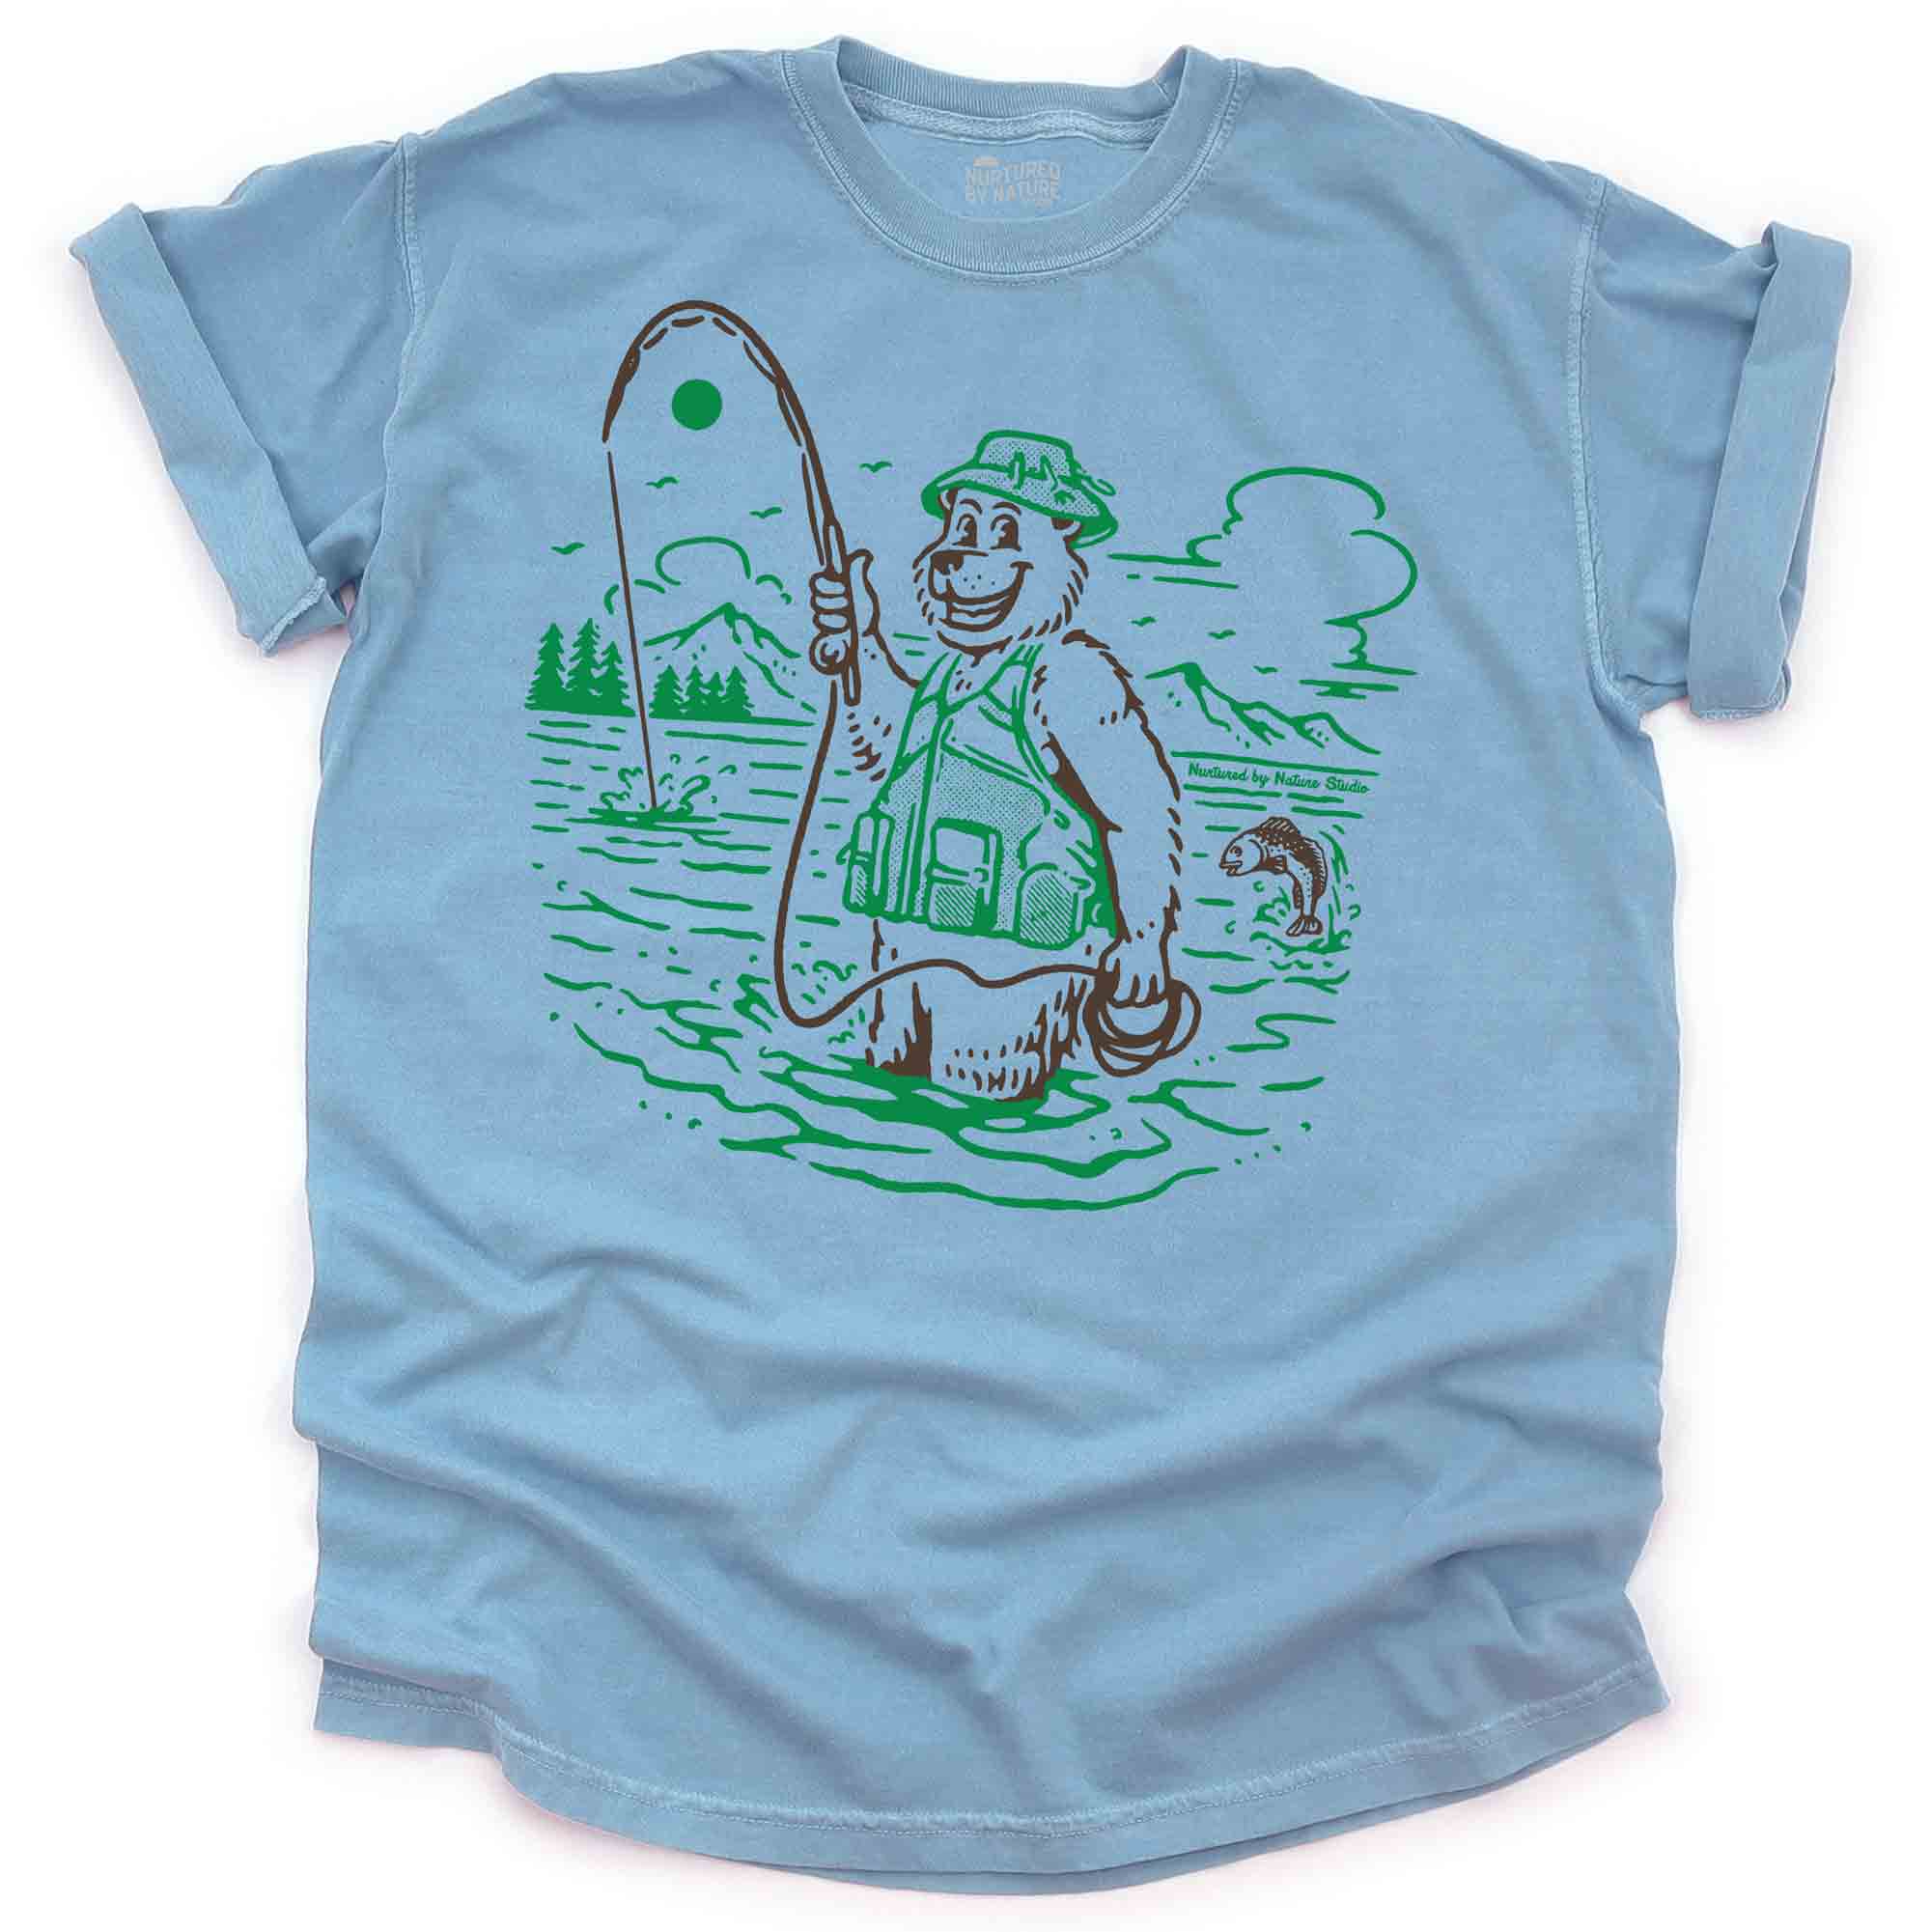 Vintage Fishing T-Shirts for Sale